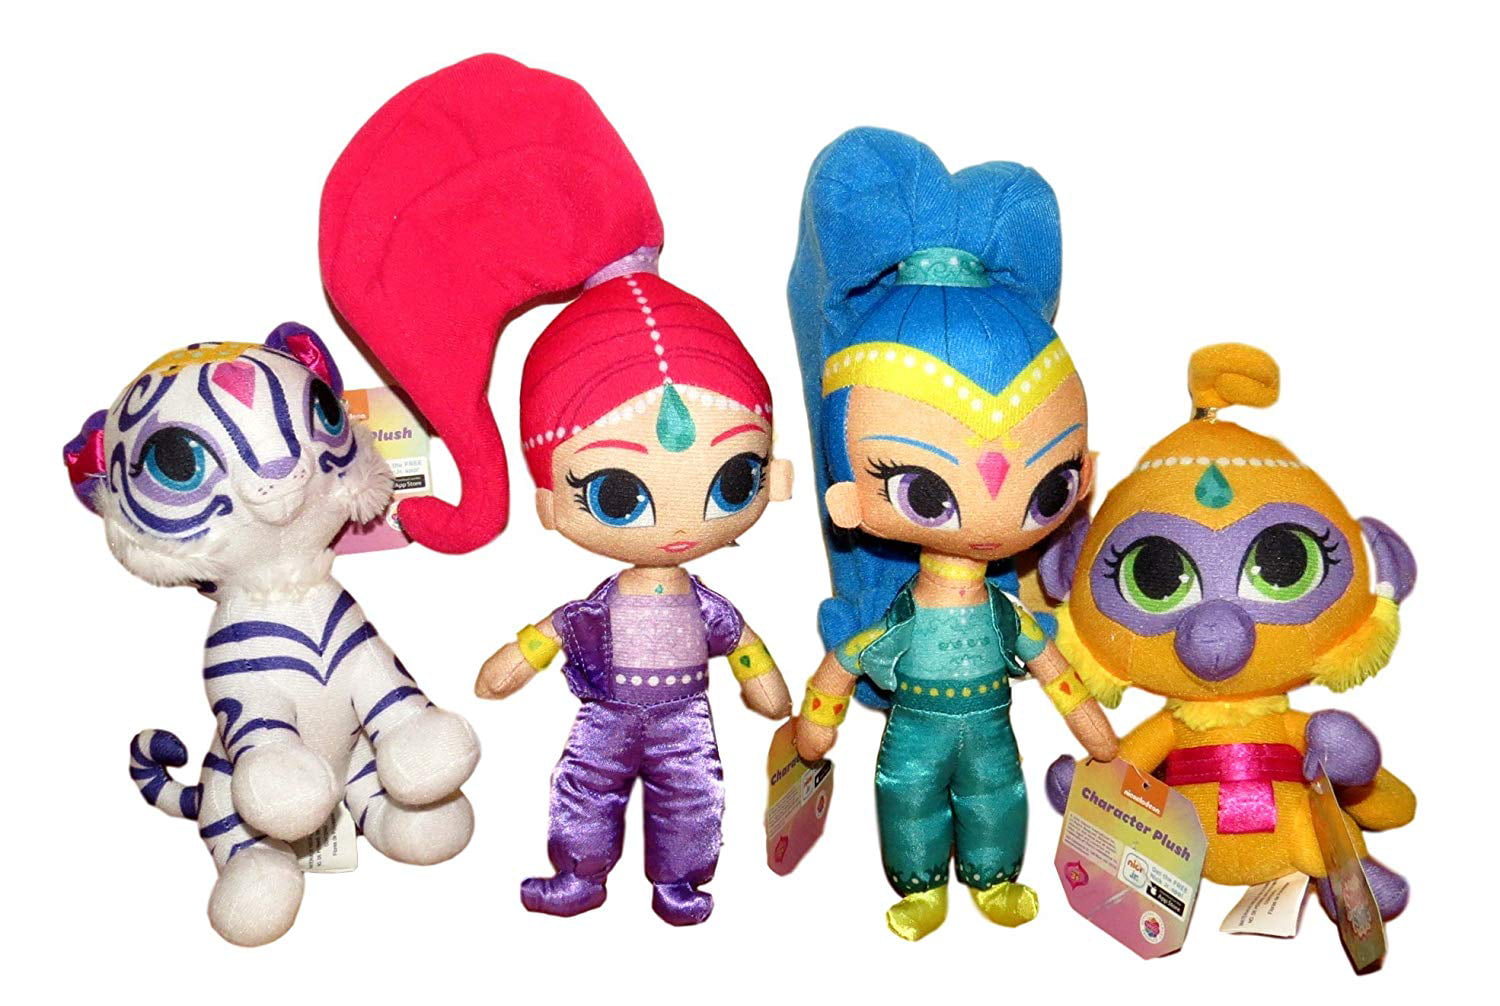 Nickelodeon Shimmer and Shine Shimmer Plush Soft Stuffed Doll 30 cm tall 